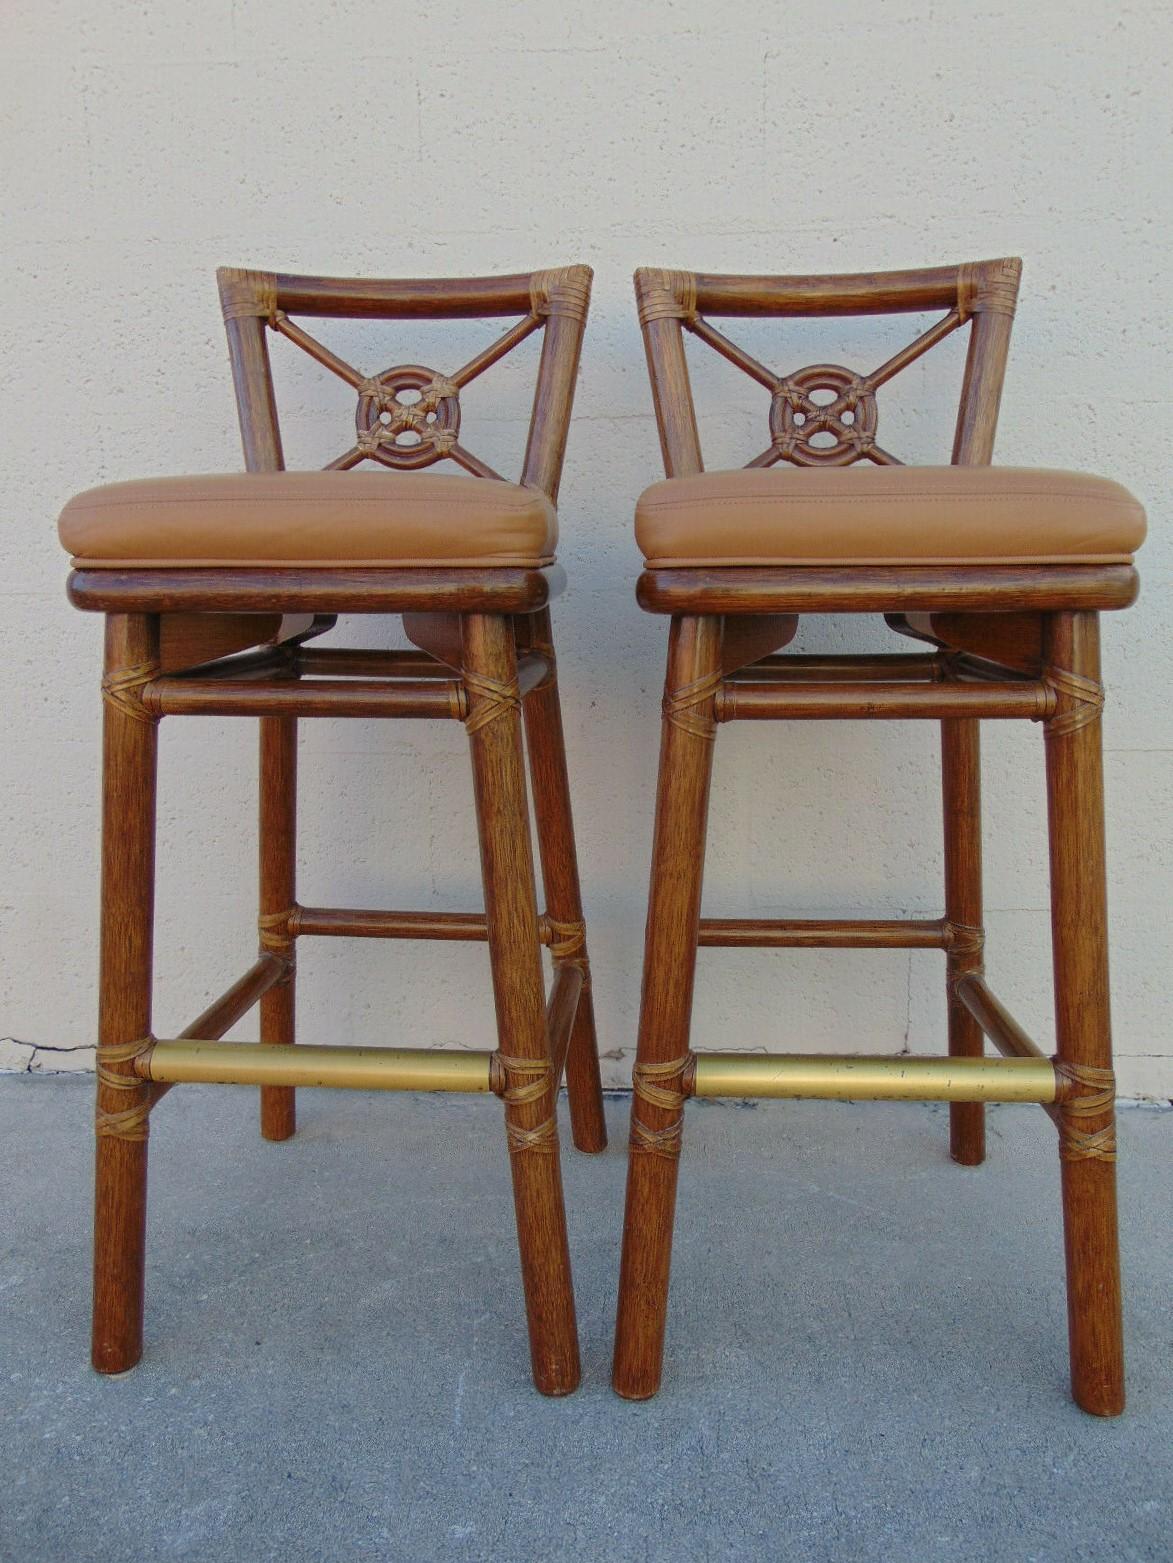 Contemporary McGuire Organic Modern Rattan Target Back Barstools, a Pair